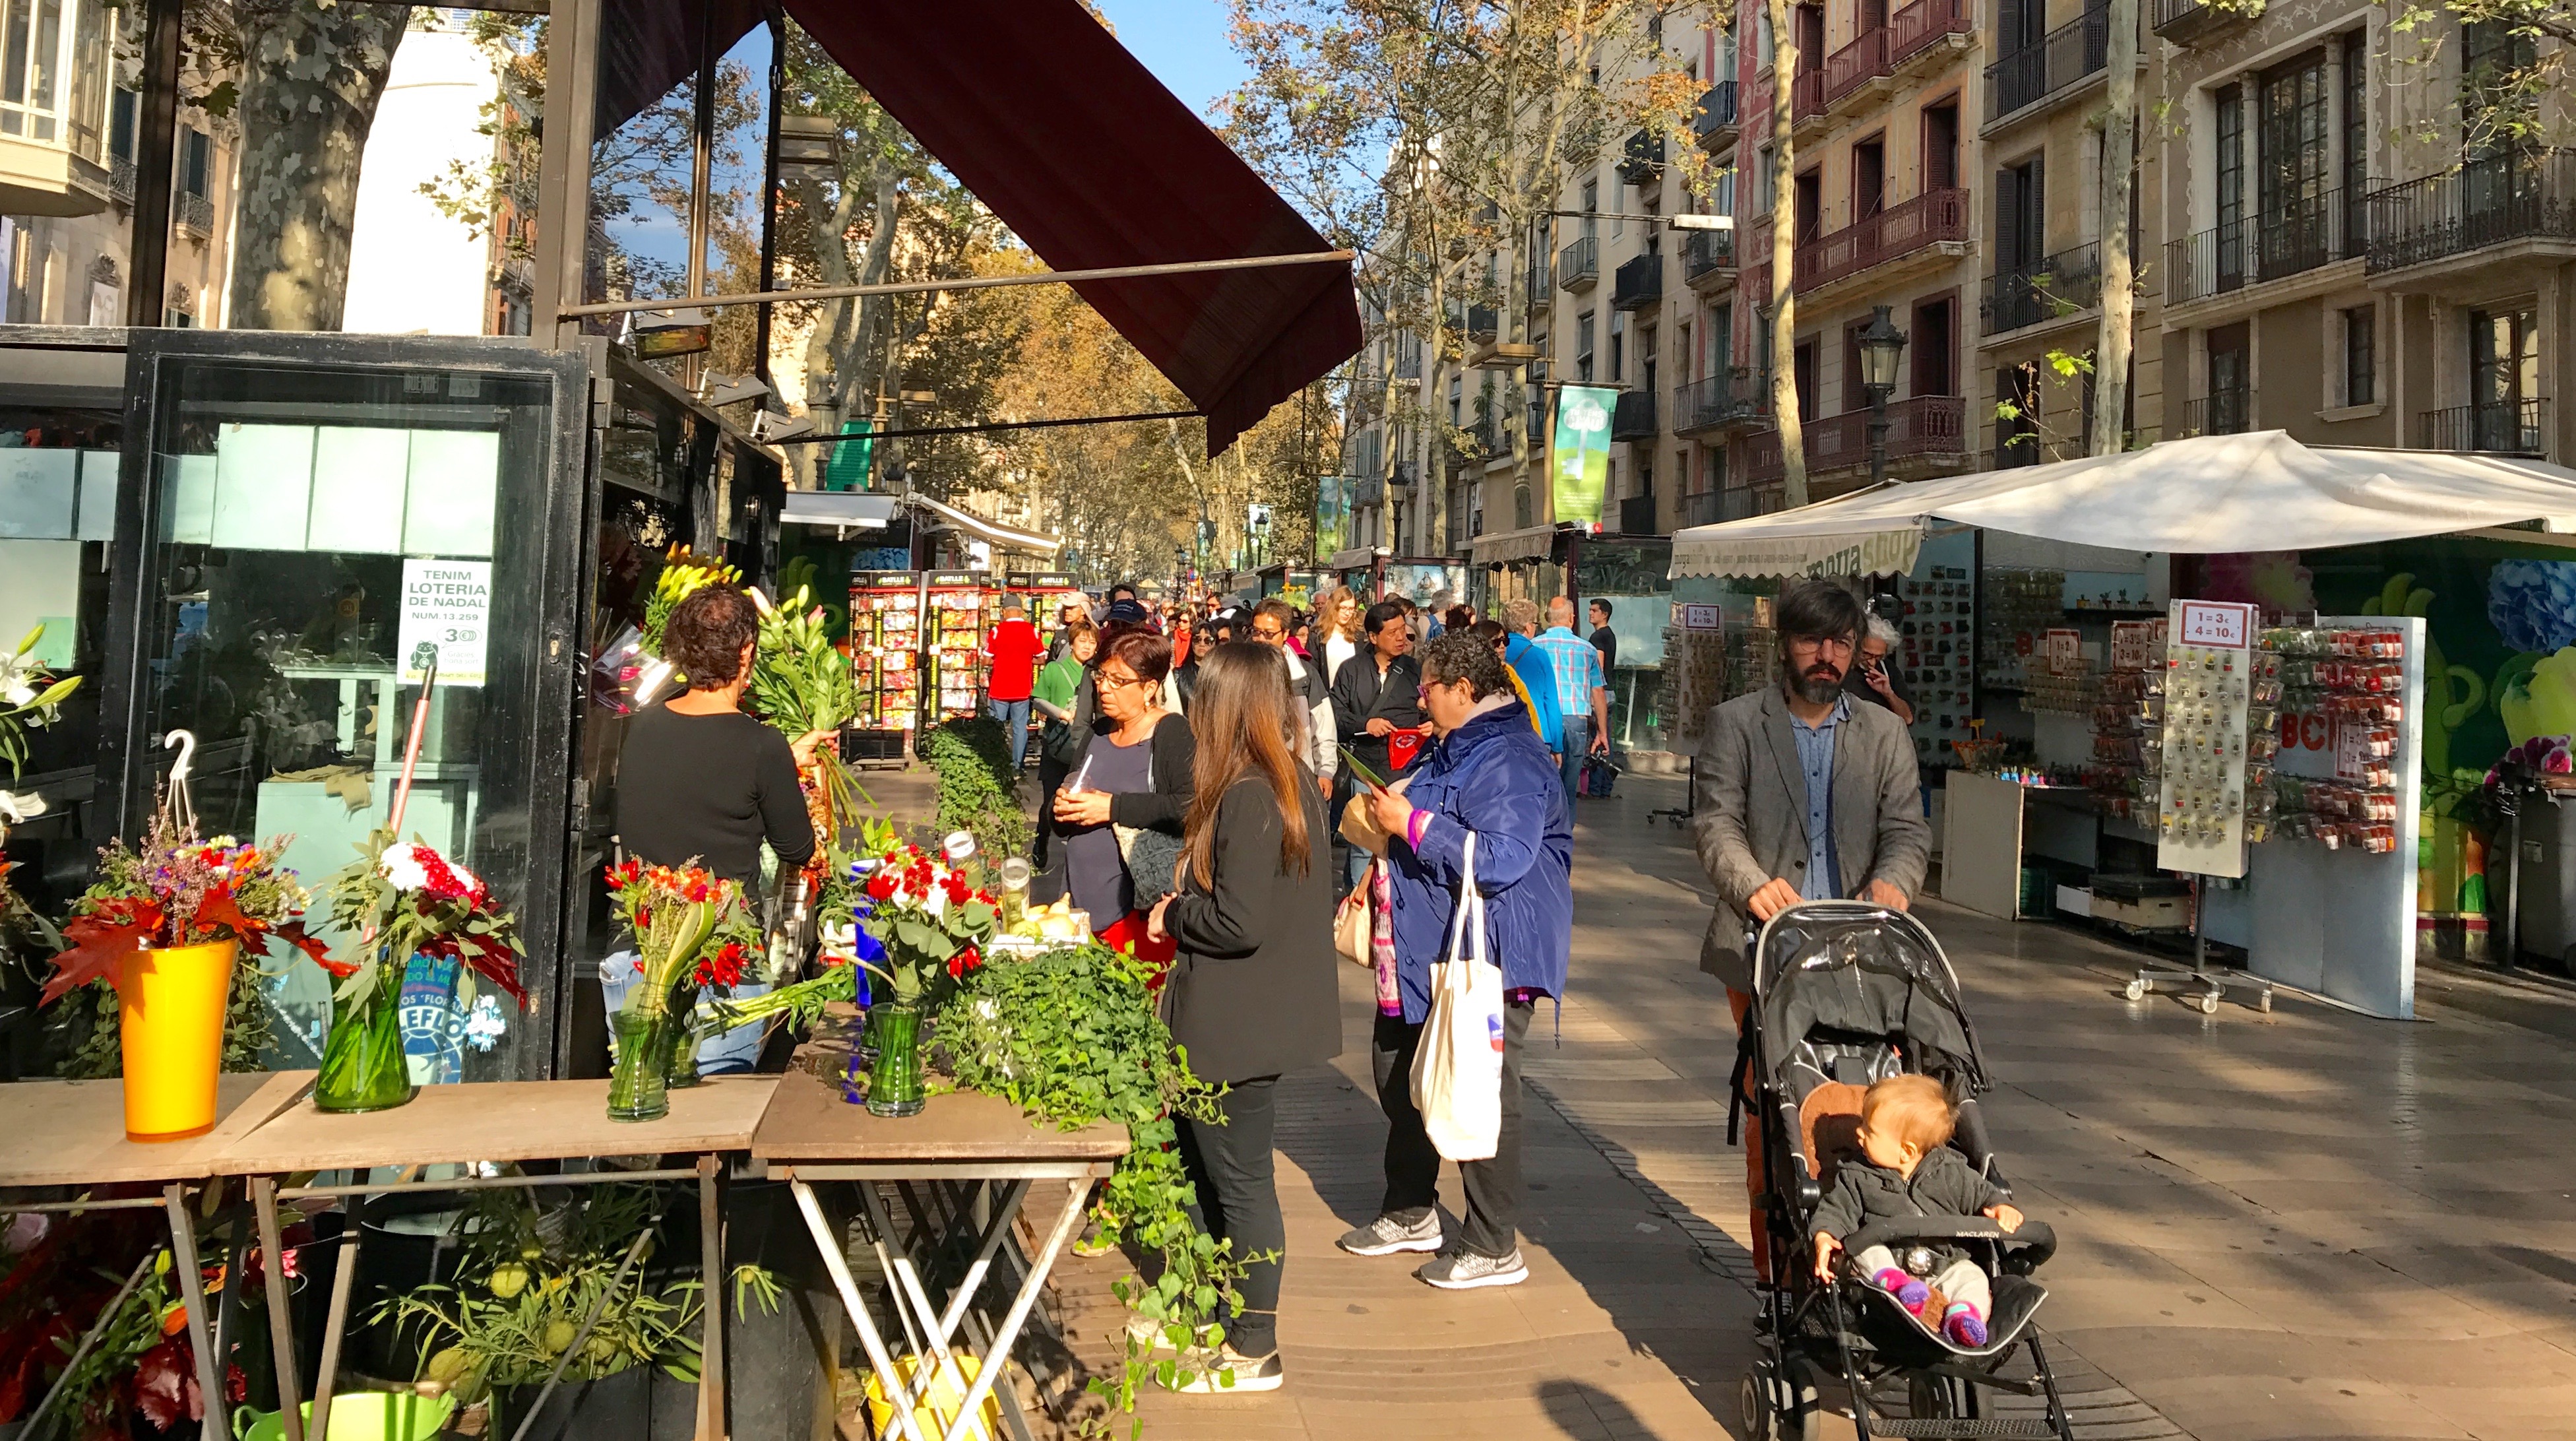 La Rambla - Barcelona's most famous street, filled with flower vendors, souvenir kiosks, cafes and throngs of people.